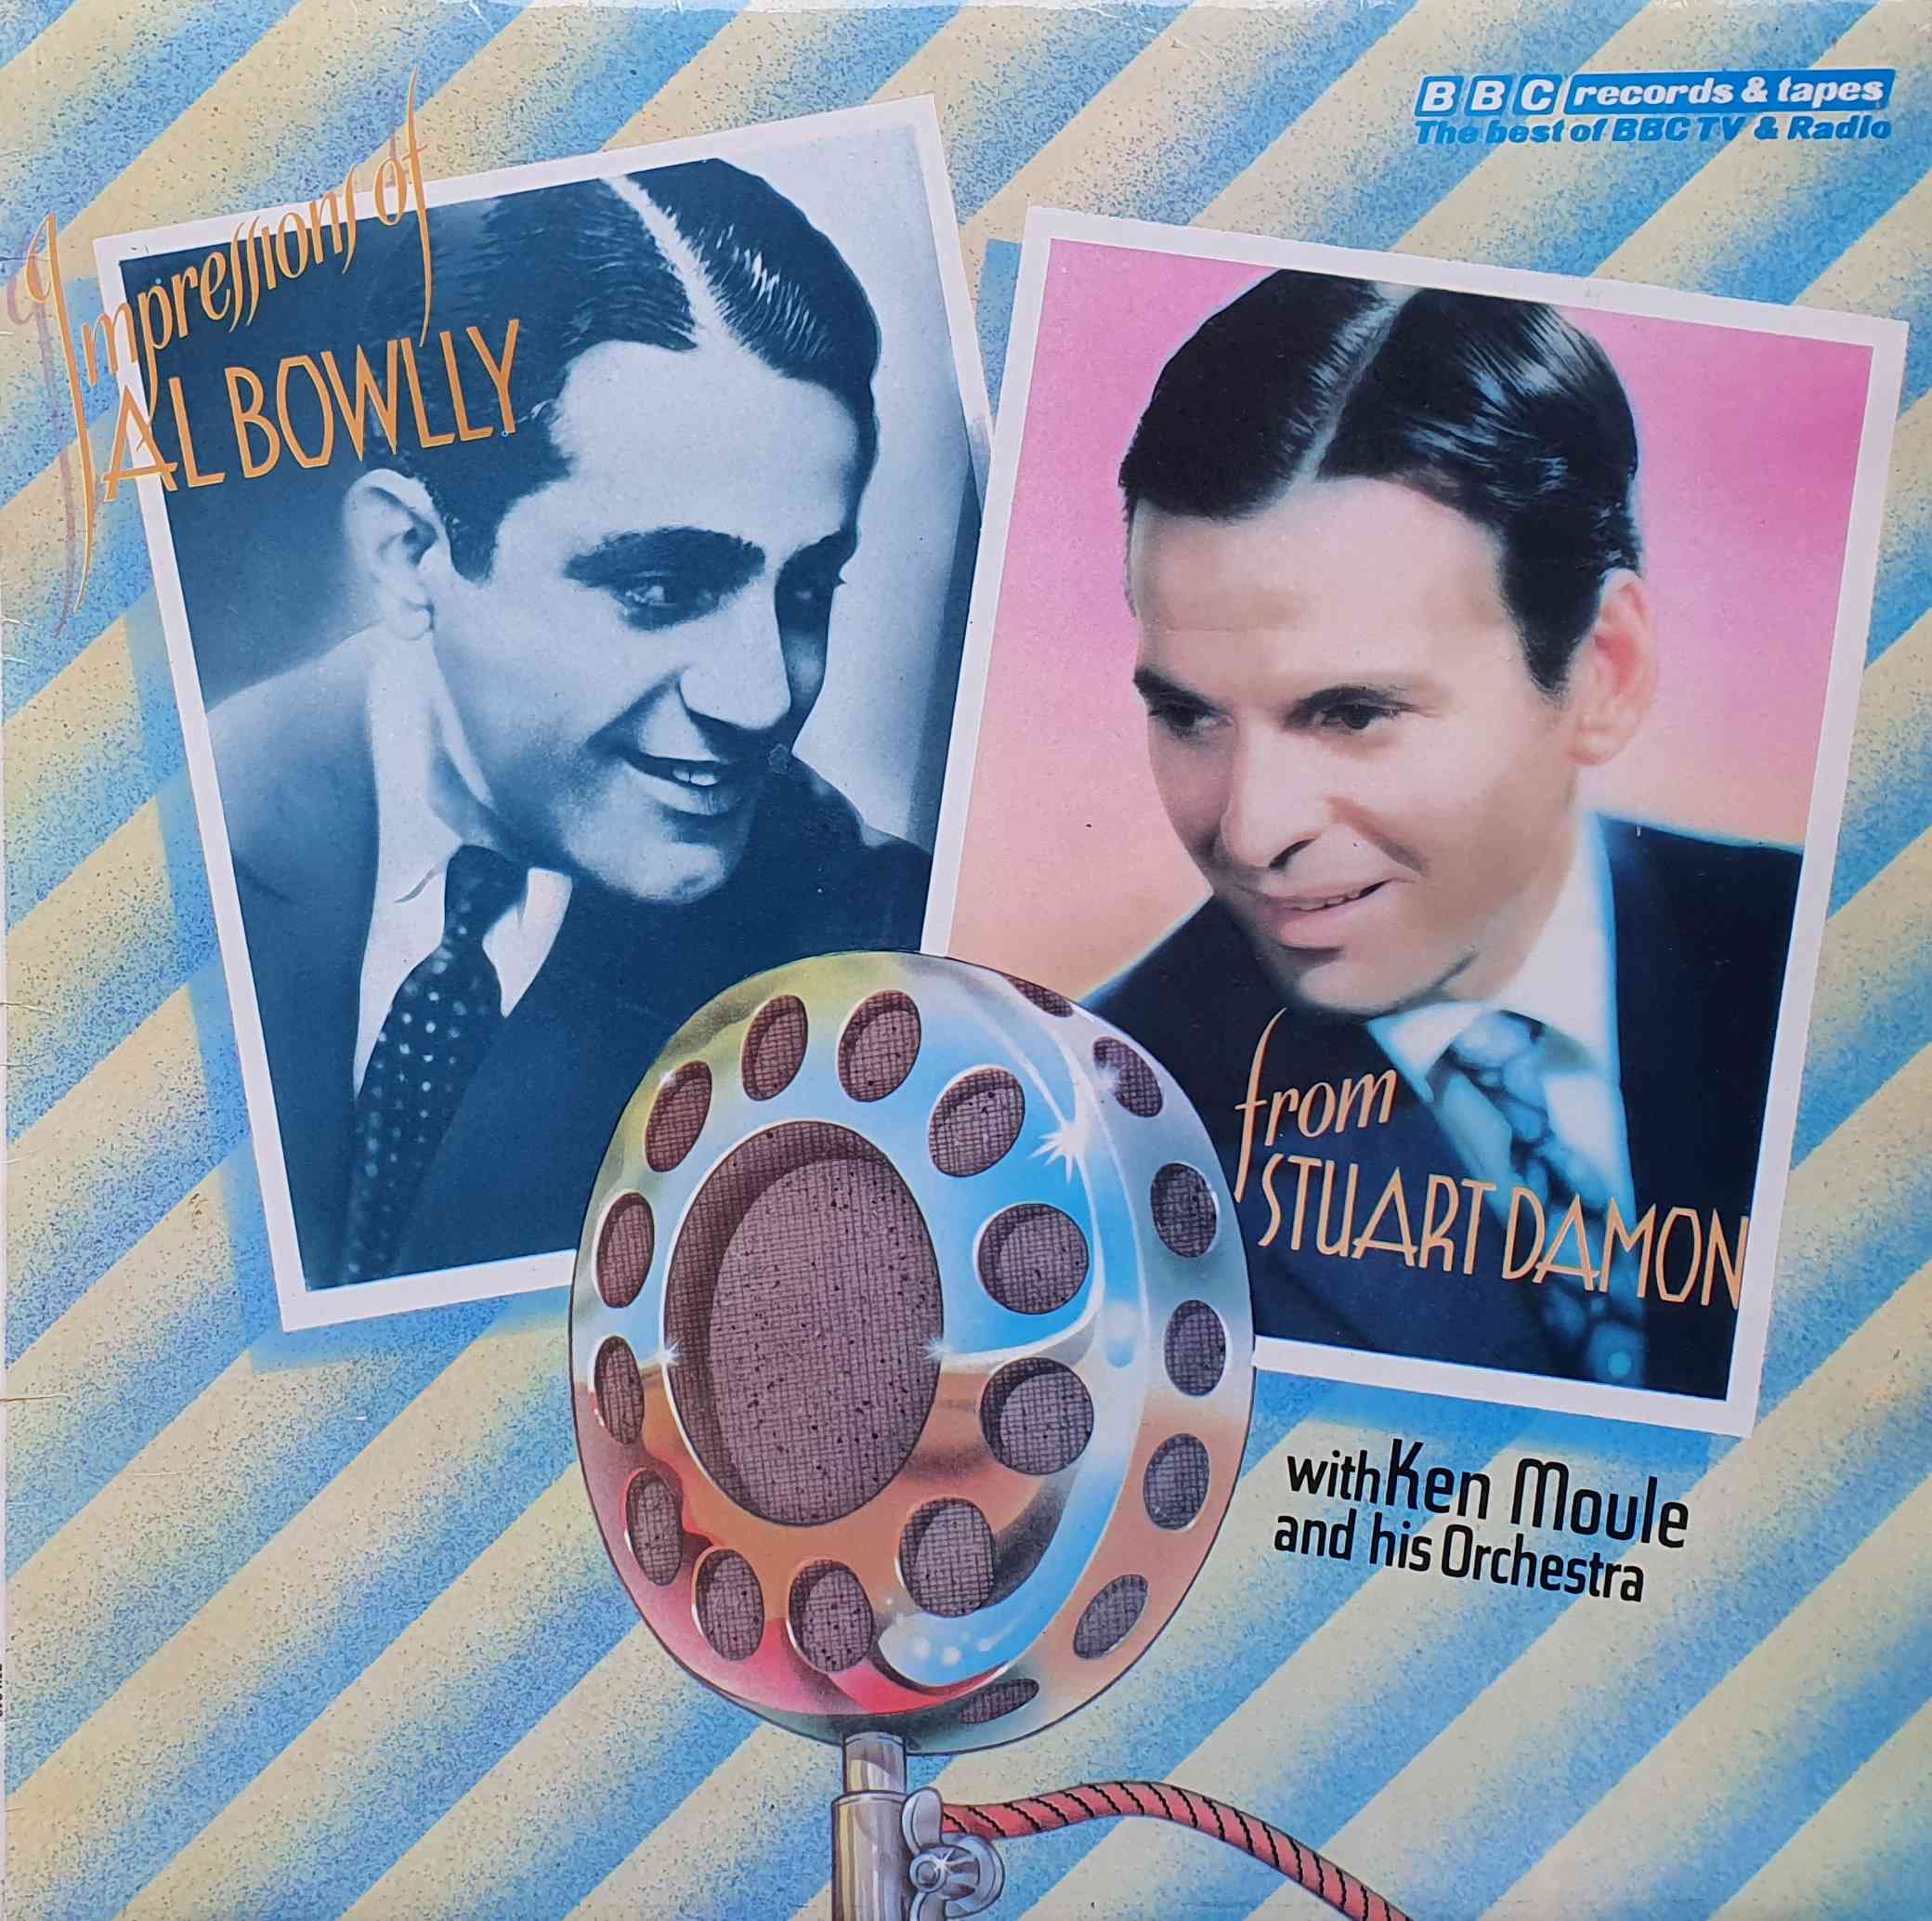 Picture of REH 218 Impressions of Al Bowlly by artist Stuart Damon from the BBC albums - Records and Tapes library